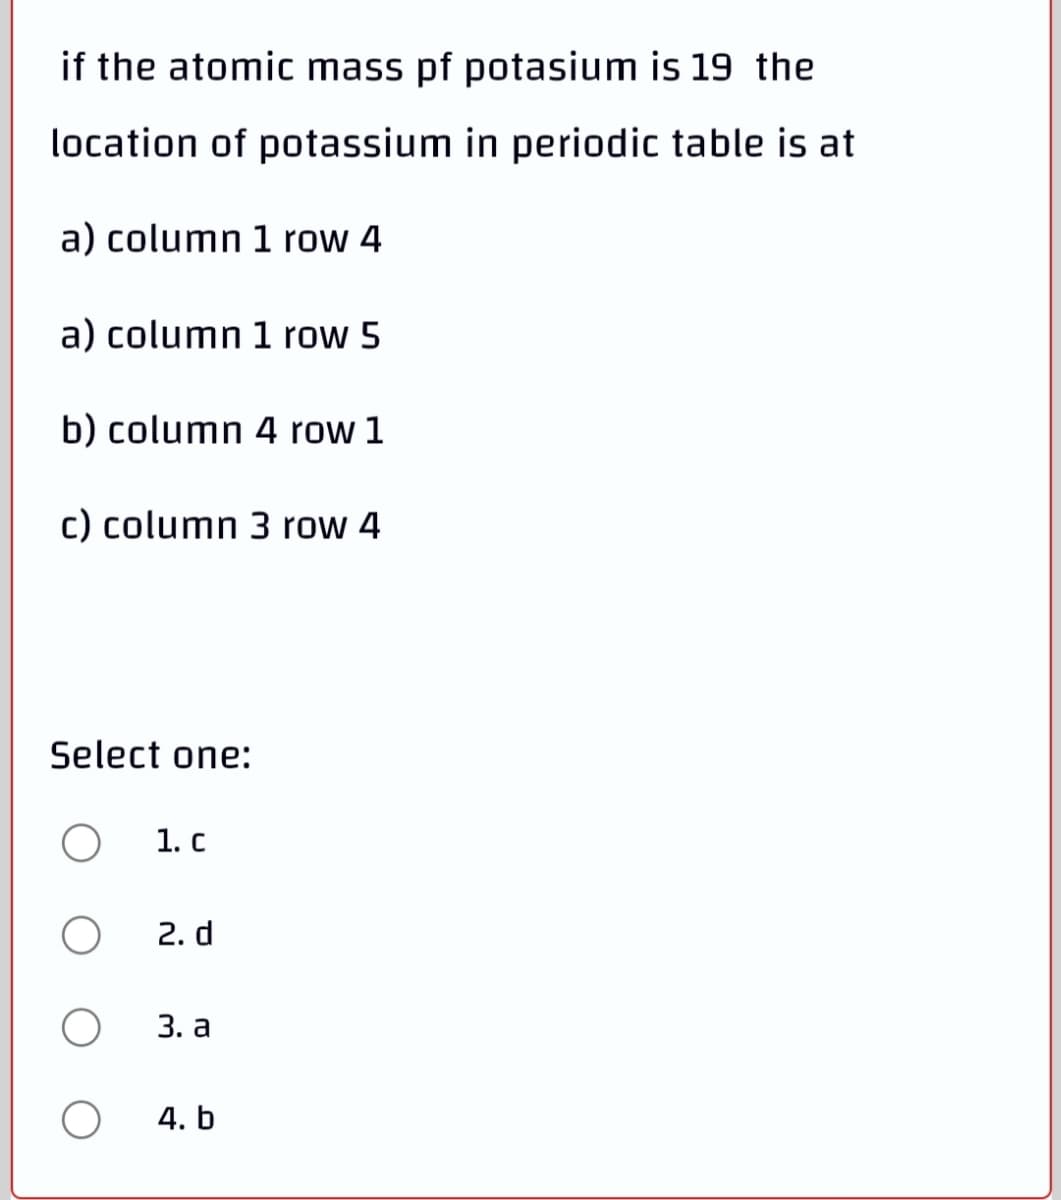 if the atomic mass pf potasium is 19 the
location of potassium in periodic table is at
a) column 1 row 4
a) column 1 row 5
b) column 4 row 1
c) column 3 row 4
Select one:
1. c
2. d
3. а
4. b
